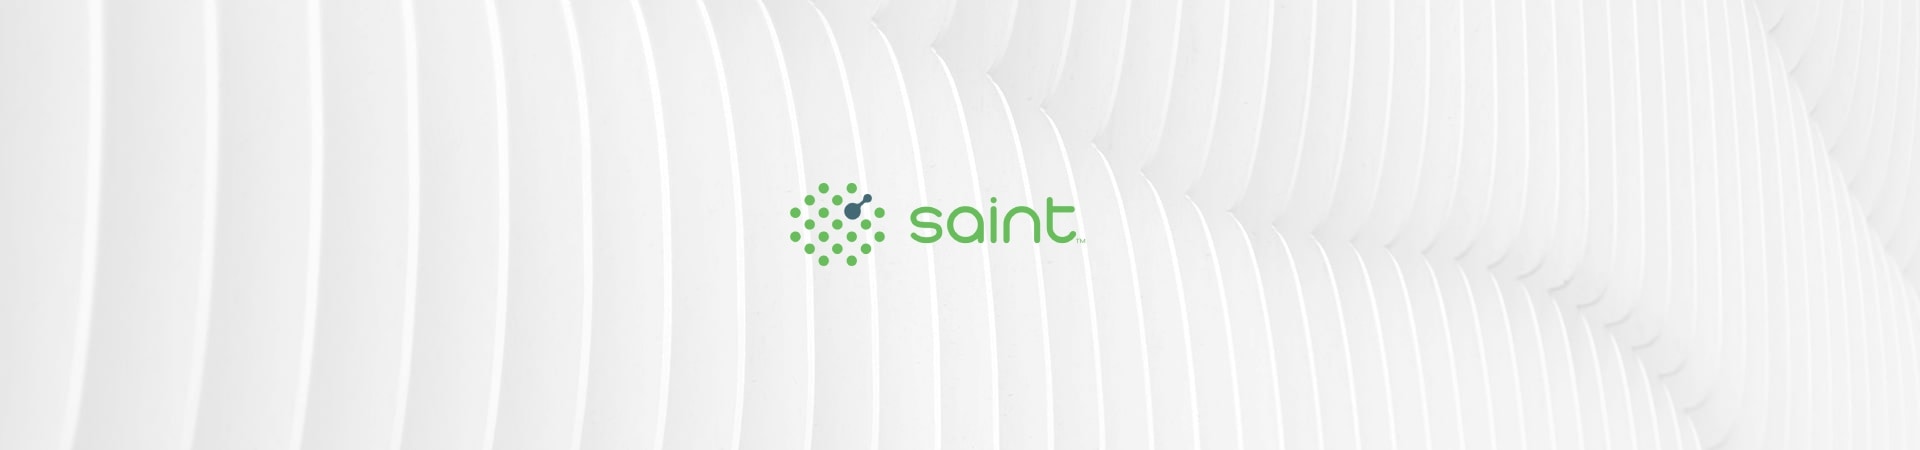 Background with SAINT logo and white lines